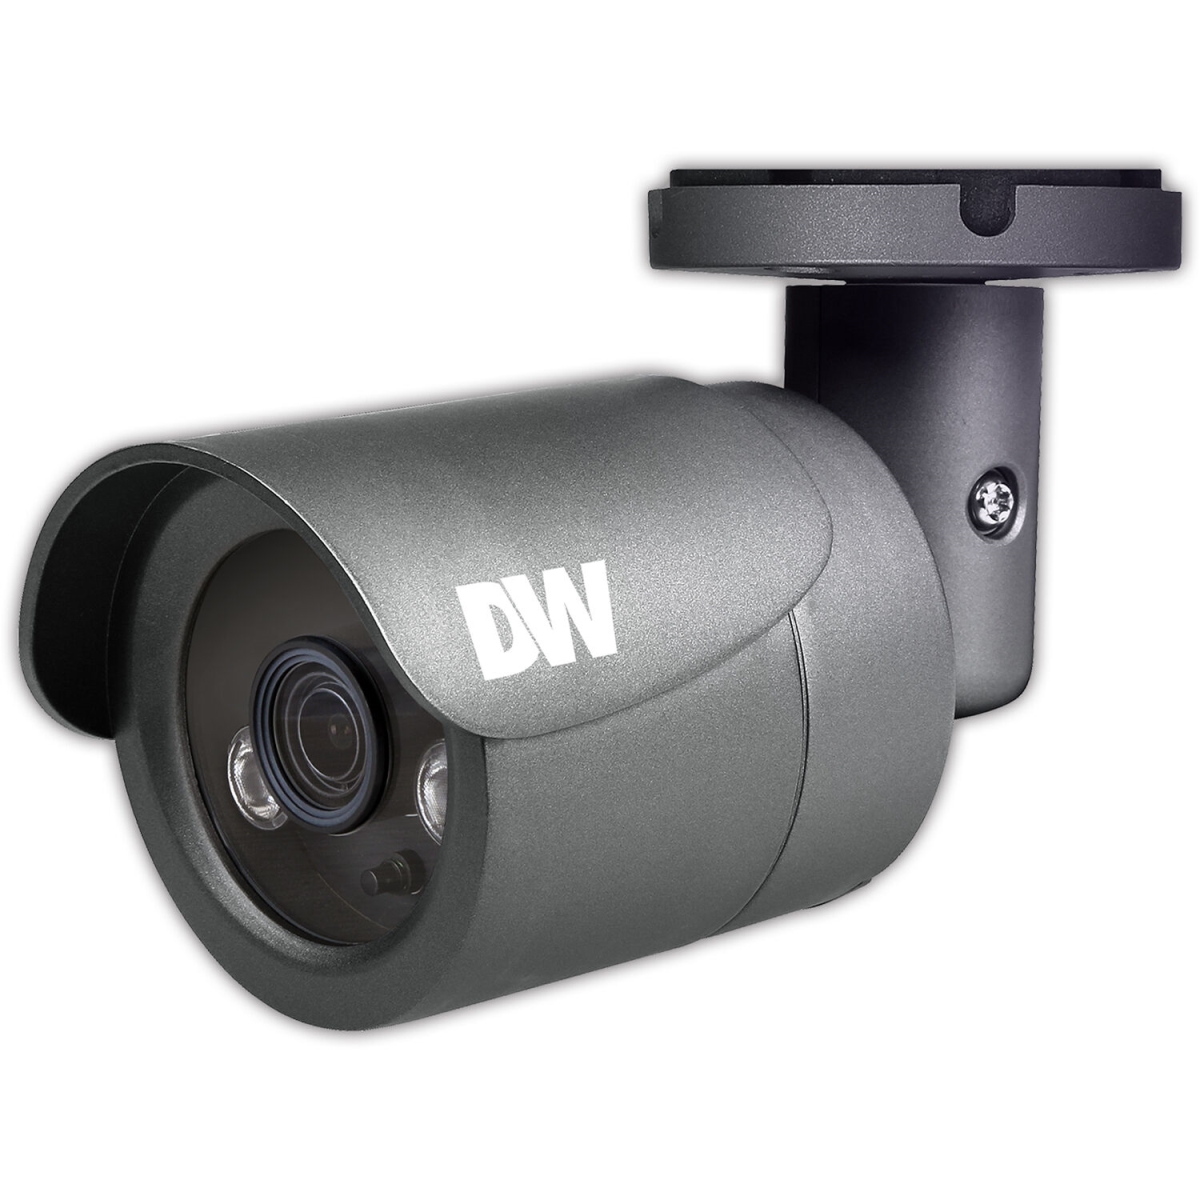 Picture of Digital Watchdog DWC-MB72WI4T 2.1 MP Weather Resistant Outdoor Network Bullet Camera with Night Vision